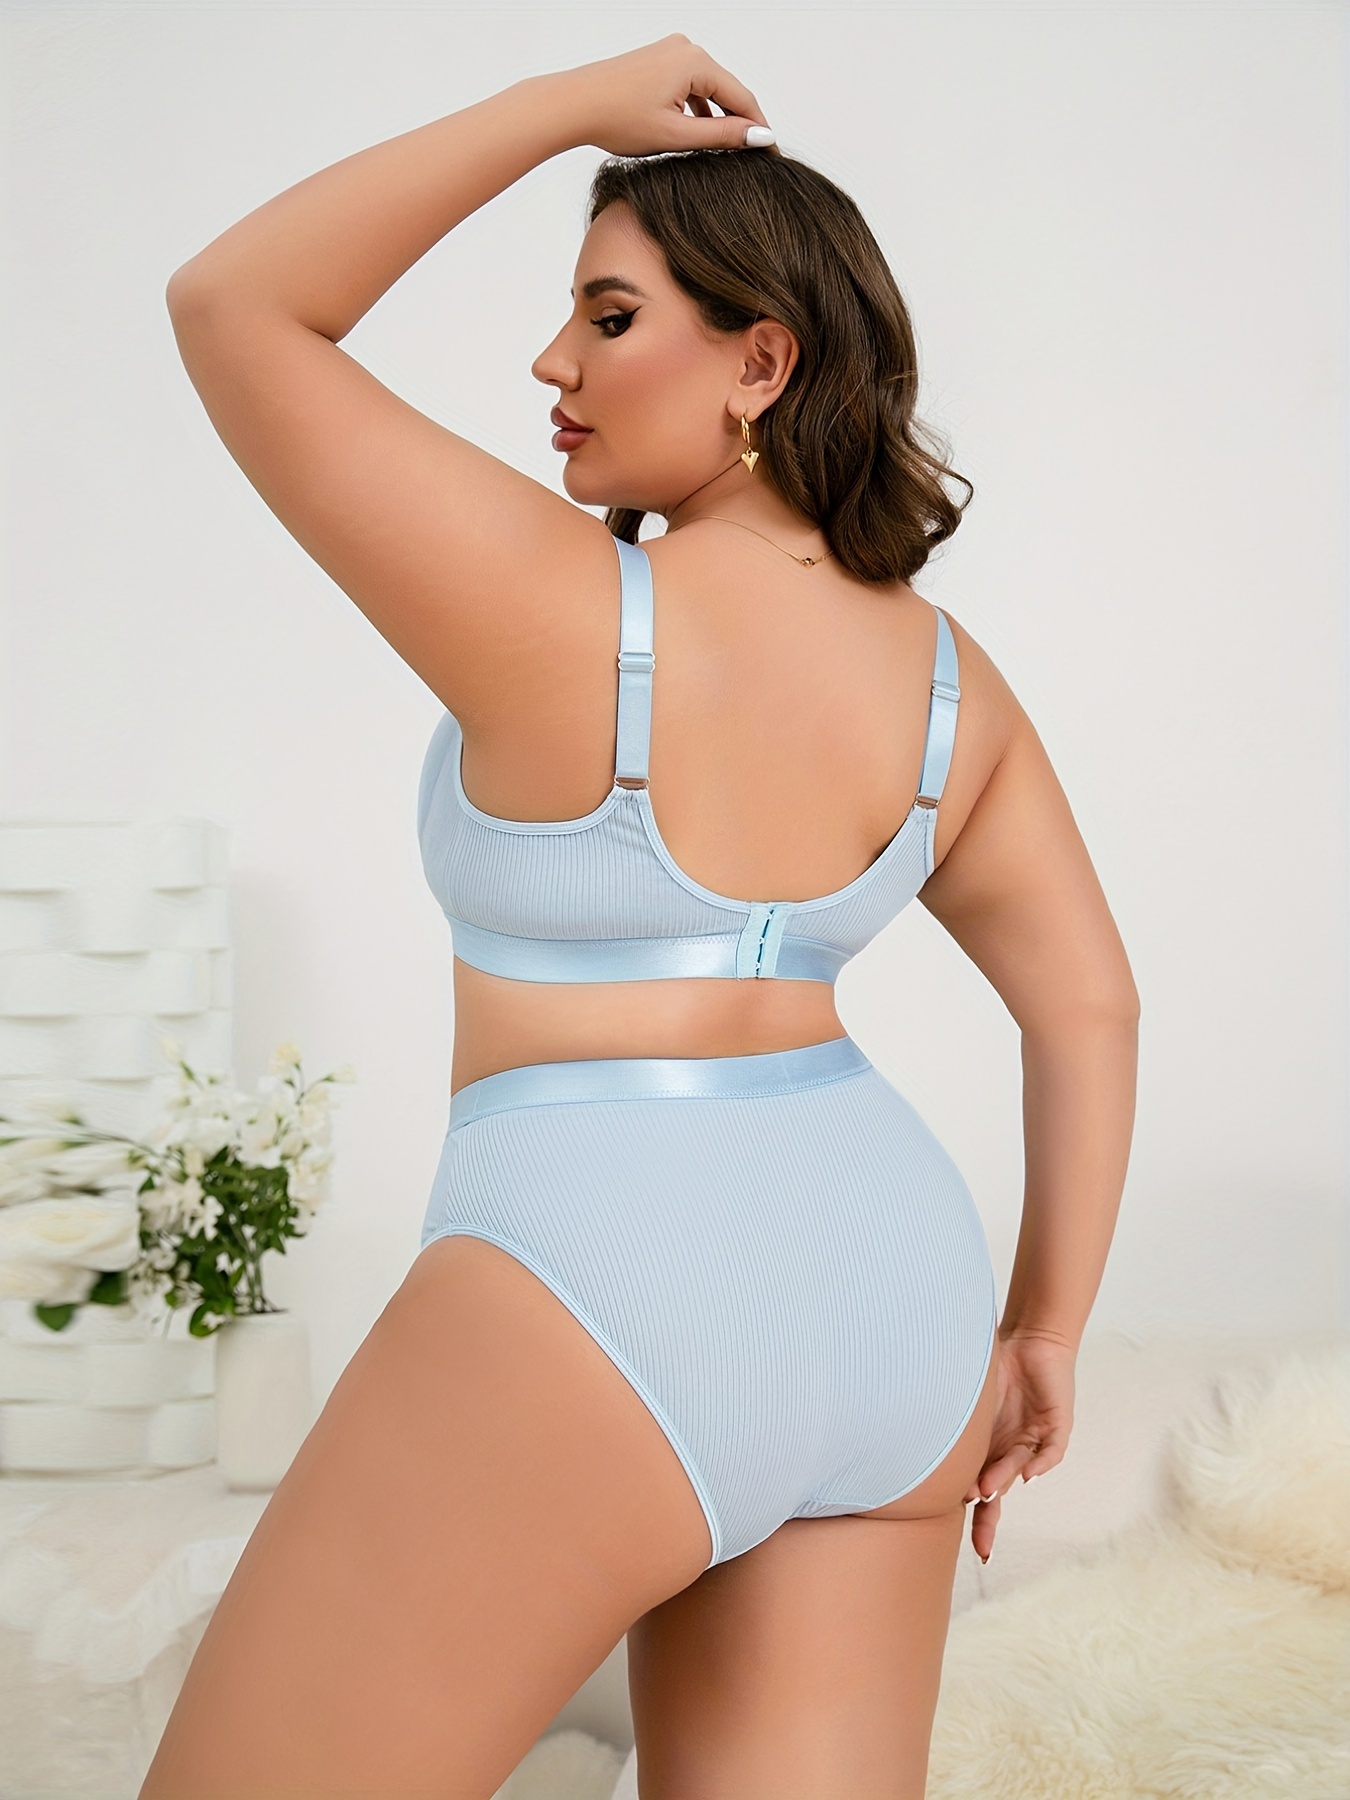 Plus Size Underwear for Women with Full Coverage/Big Size Panty